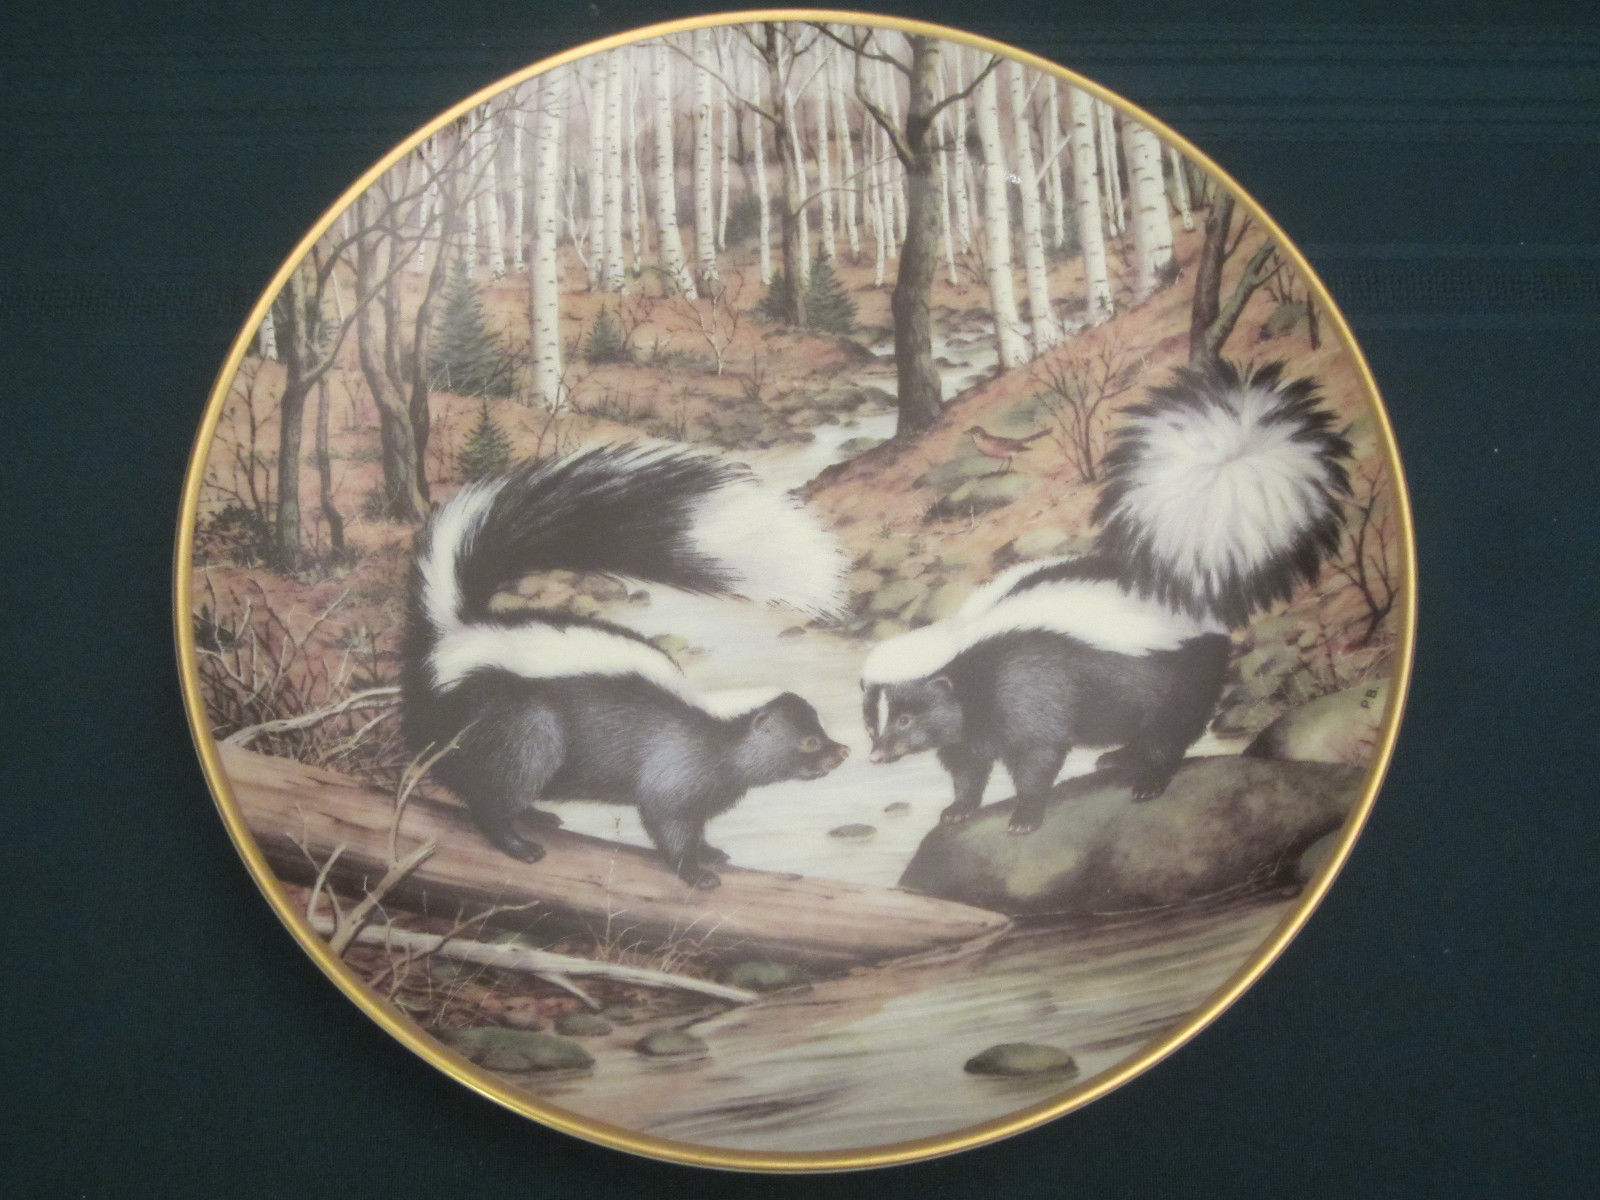 STRIPED SKUNK Collector Plate PETER BARRATT March THE WOODLAND YEAR Franklin - $28.00